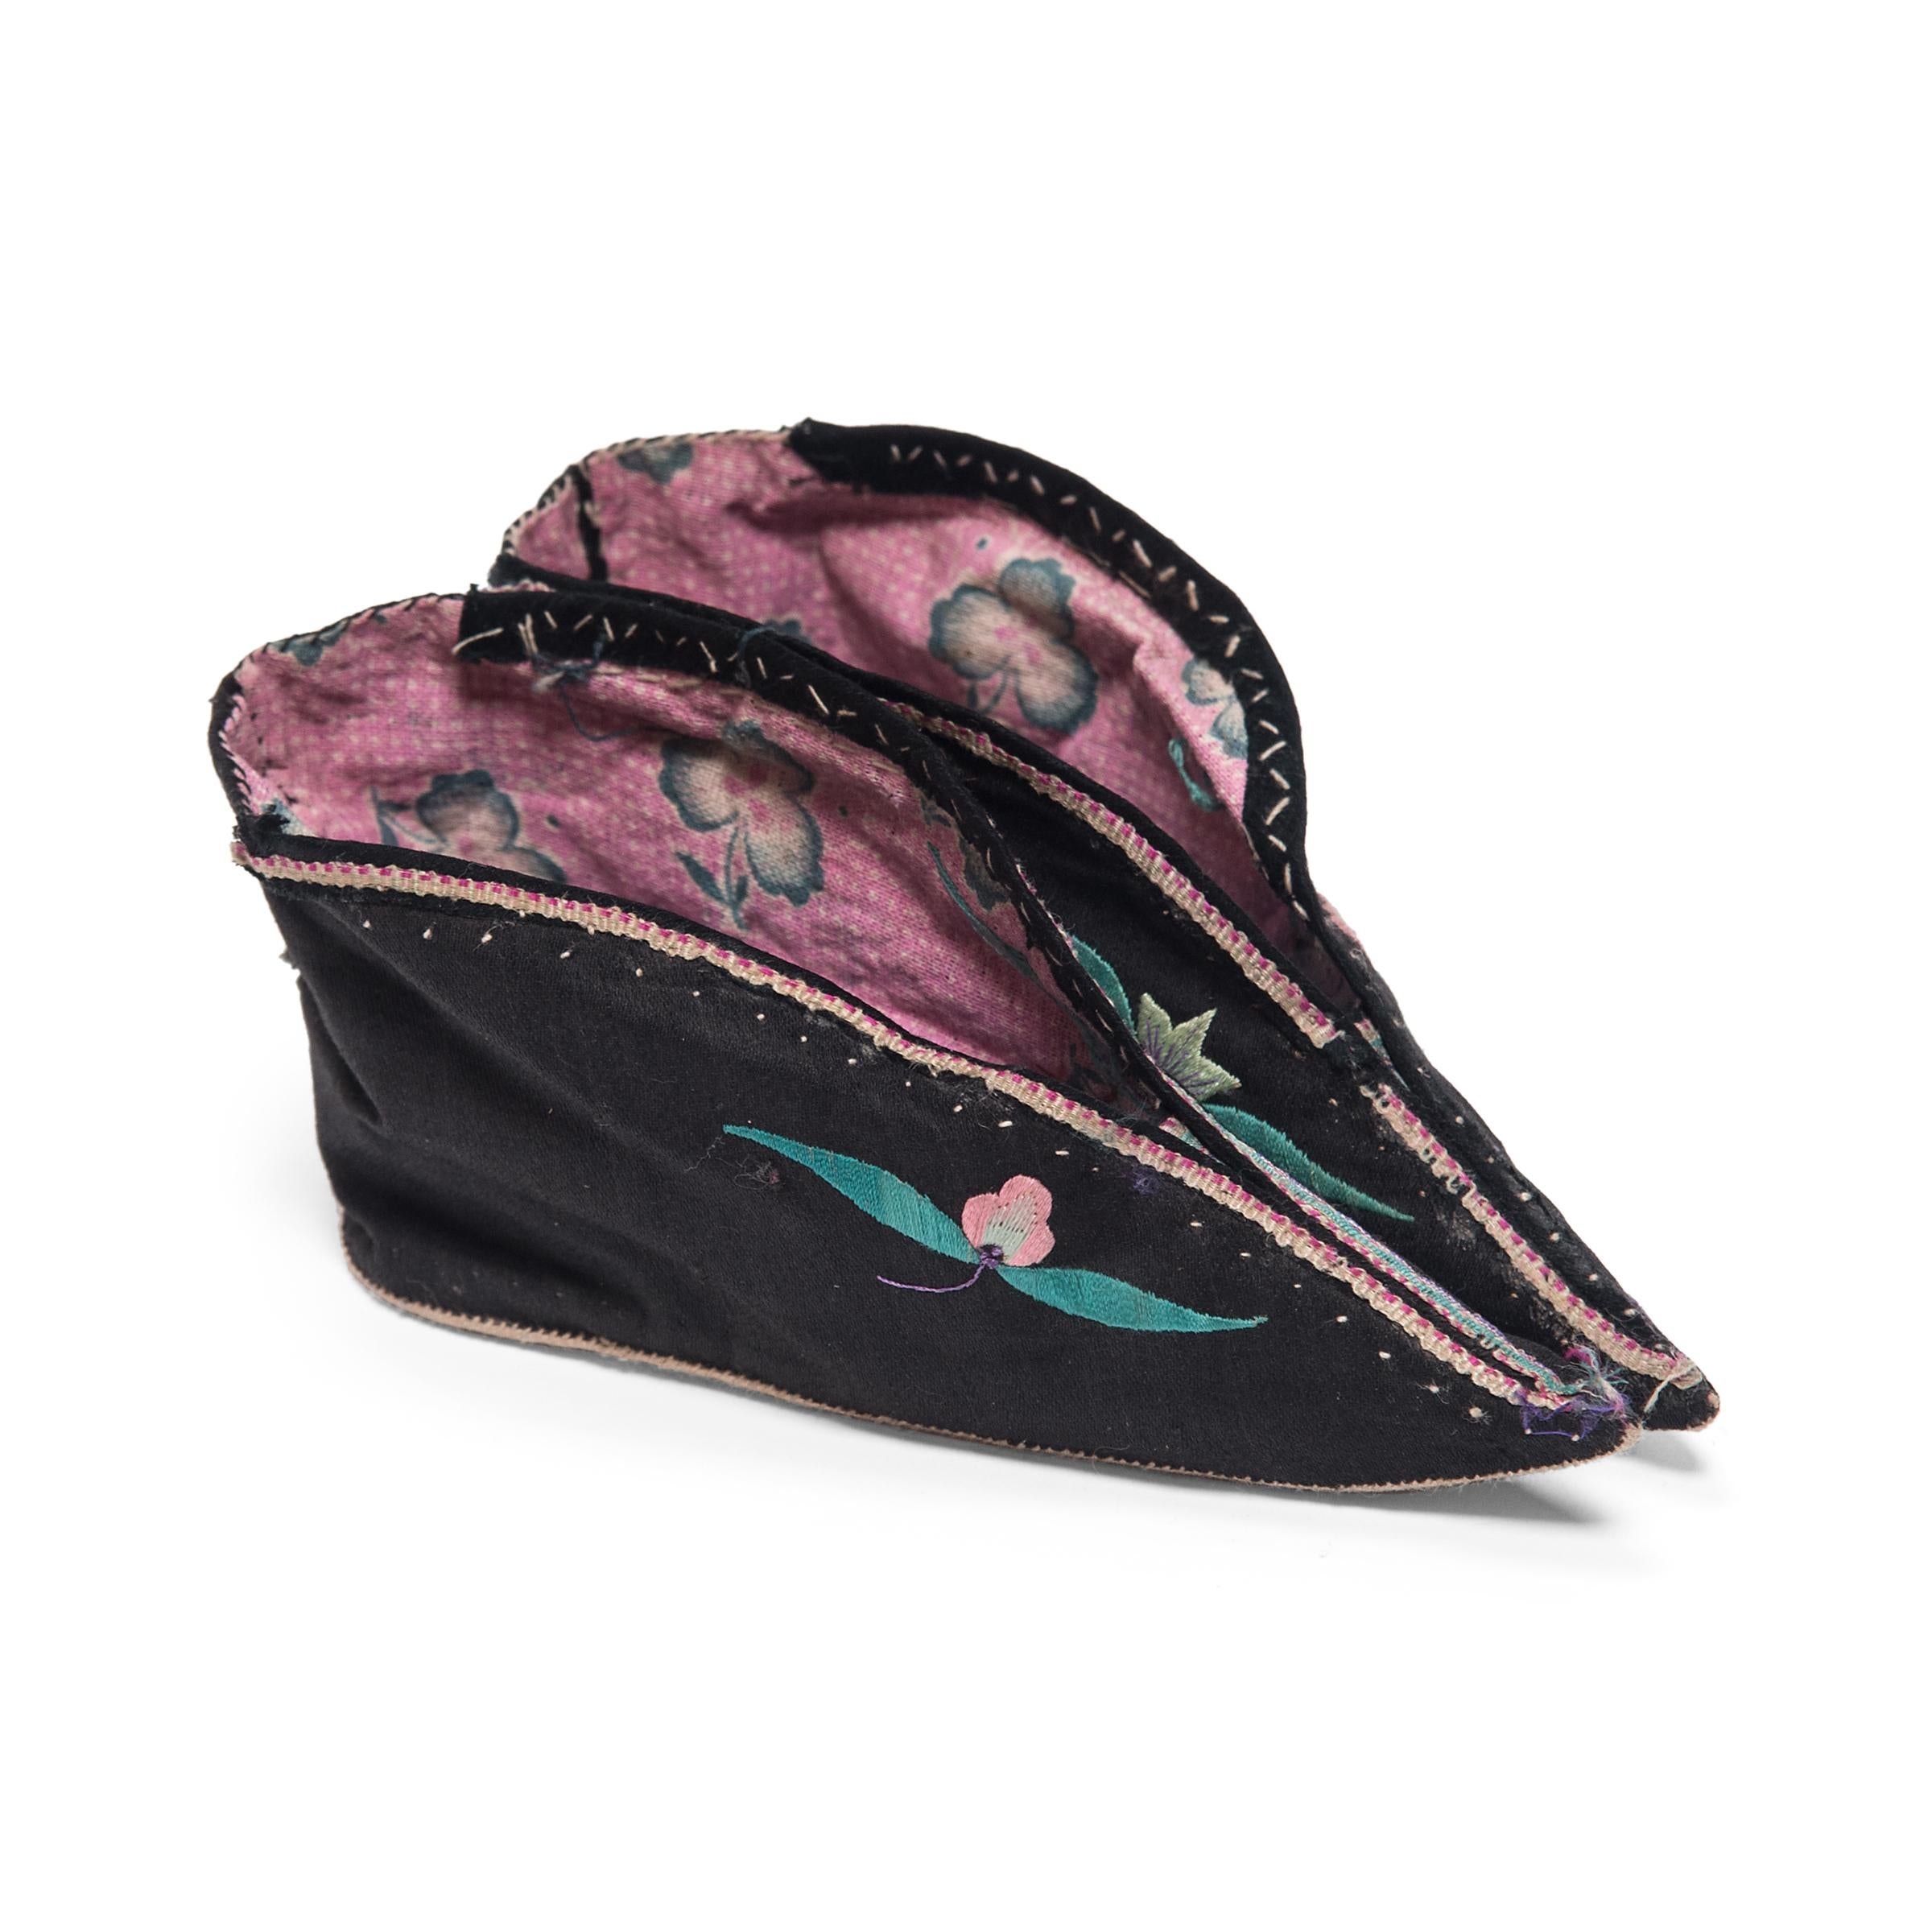 Qing Set of Six Chinese Bound-Foot Lotus Slippers, circa 1850 For Sale